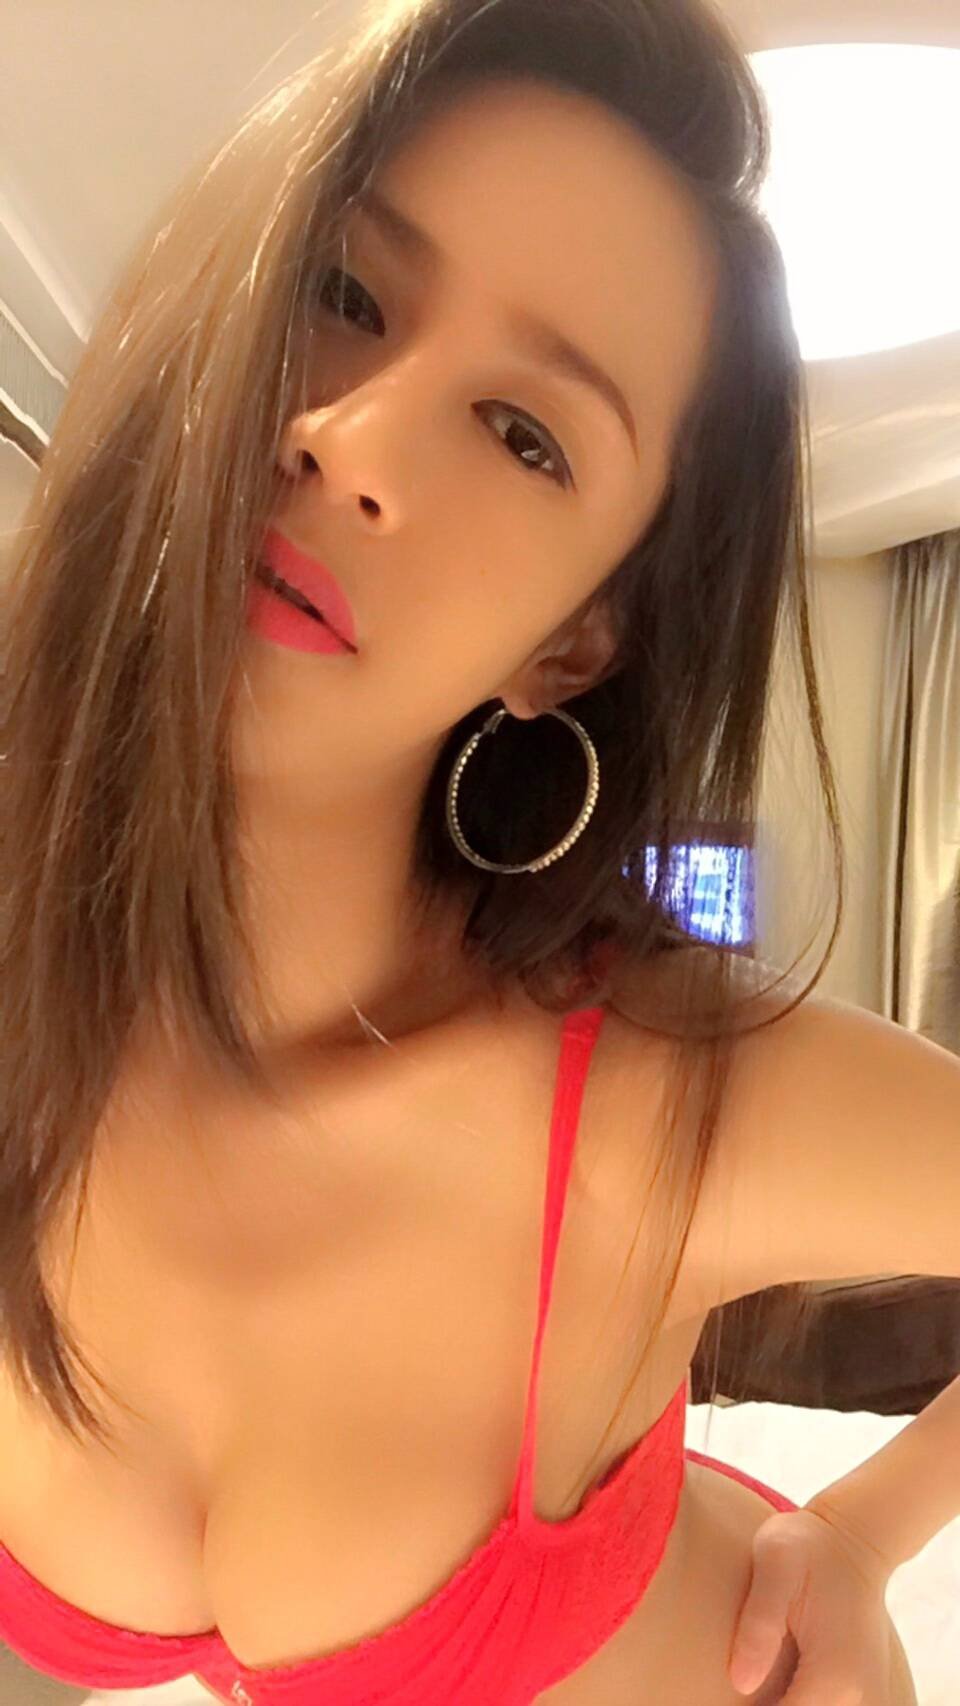 Asian Shemale Lisa Long - Lisa Benz Porn From Bkk Thailand, Thai Transsexual escort in Seoul